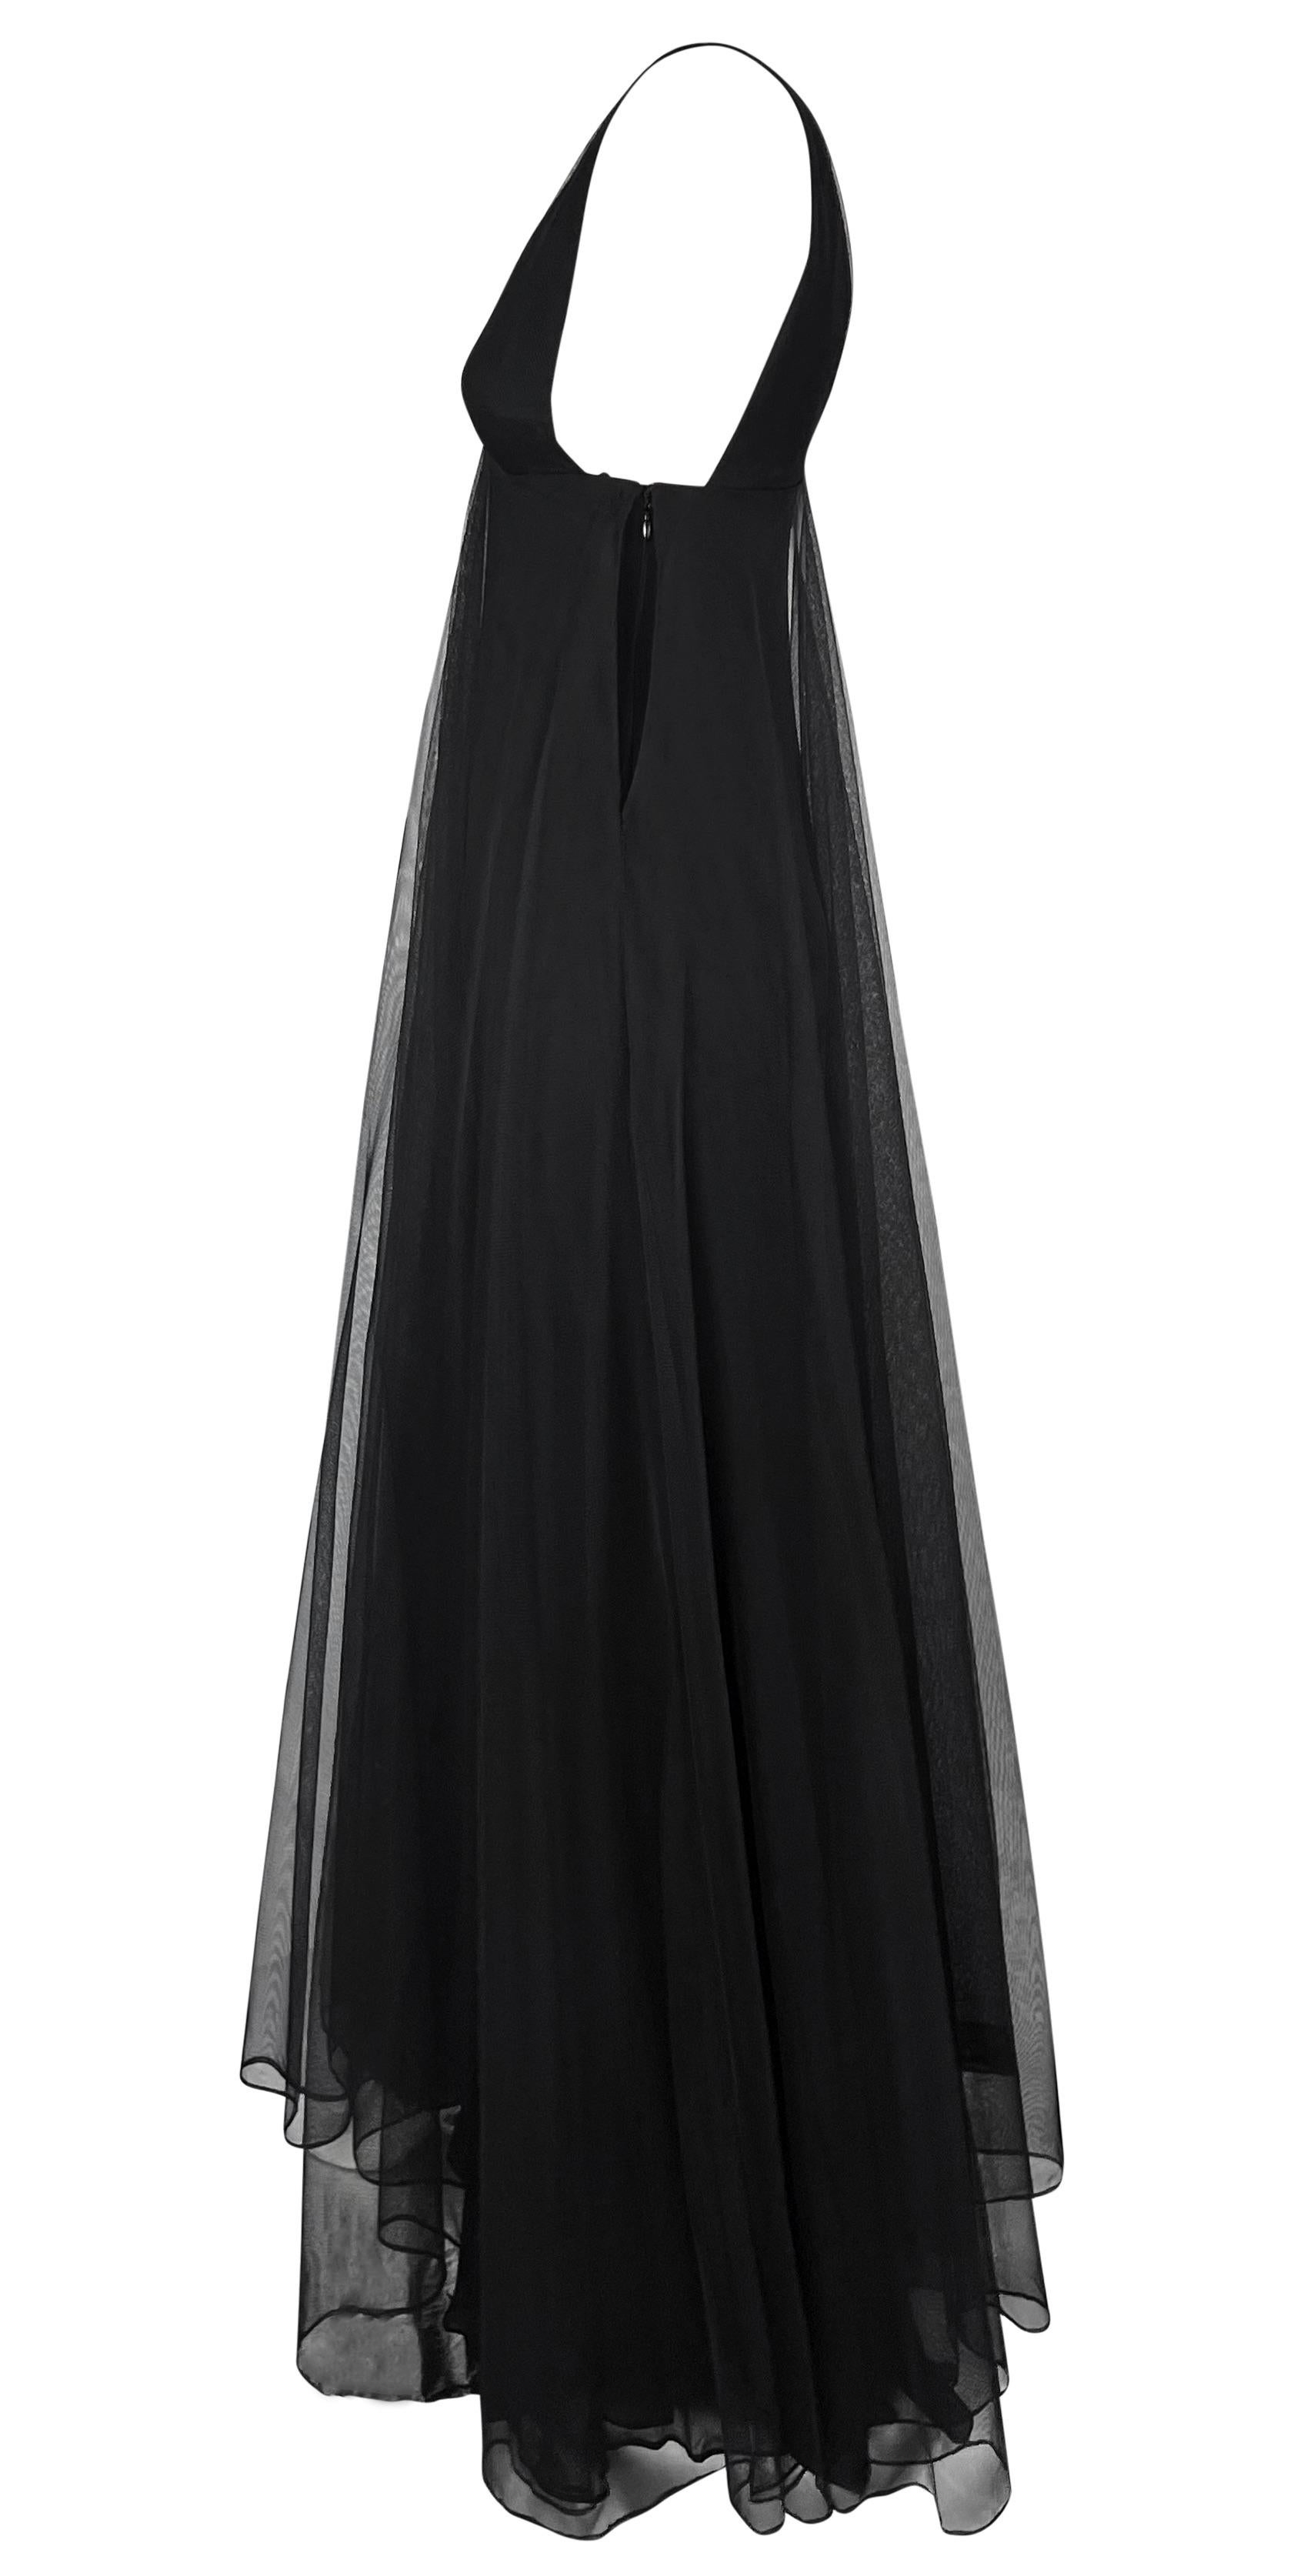 F/W 1998 Gucci by Tom Ford Runway Black Layered Tulle Sheer Plunge Gown For Sale 4